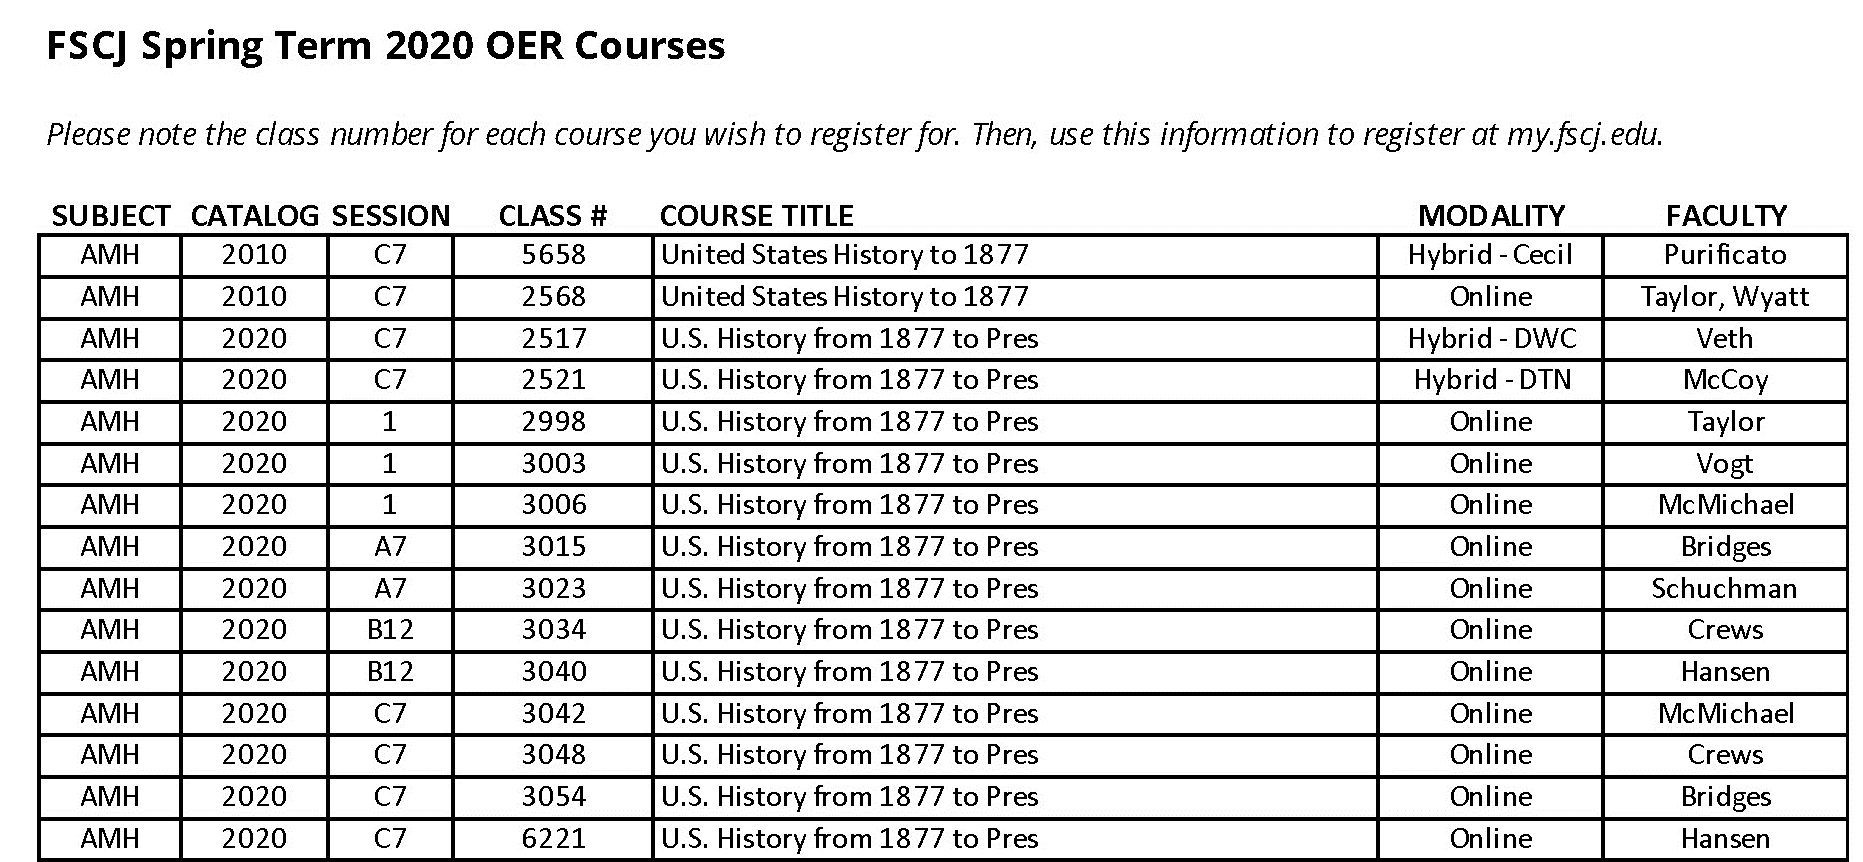 The Florida State College at Jacksonville course list presents the following details about each course listed: subject, catalog, session, class number, course title, modality, and faculty.